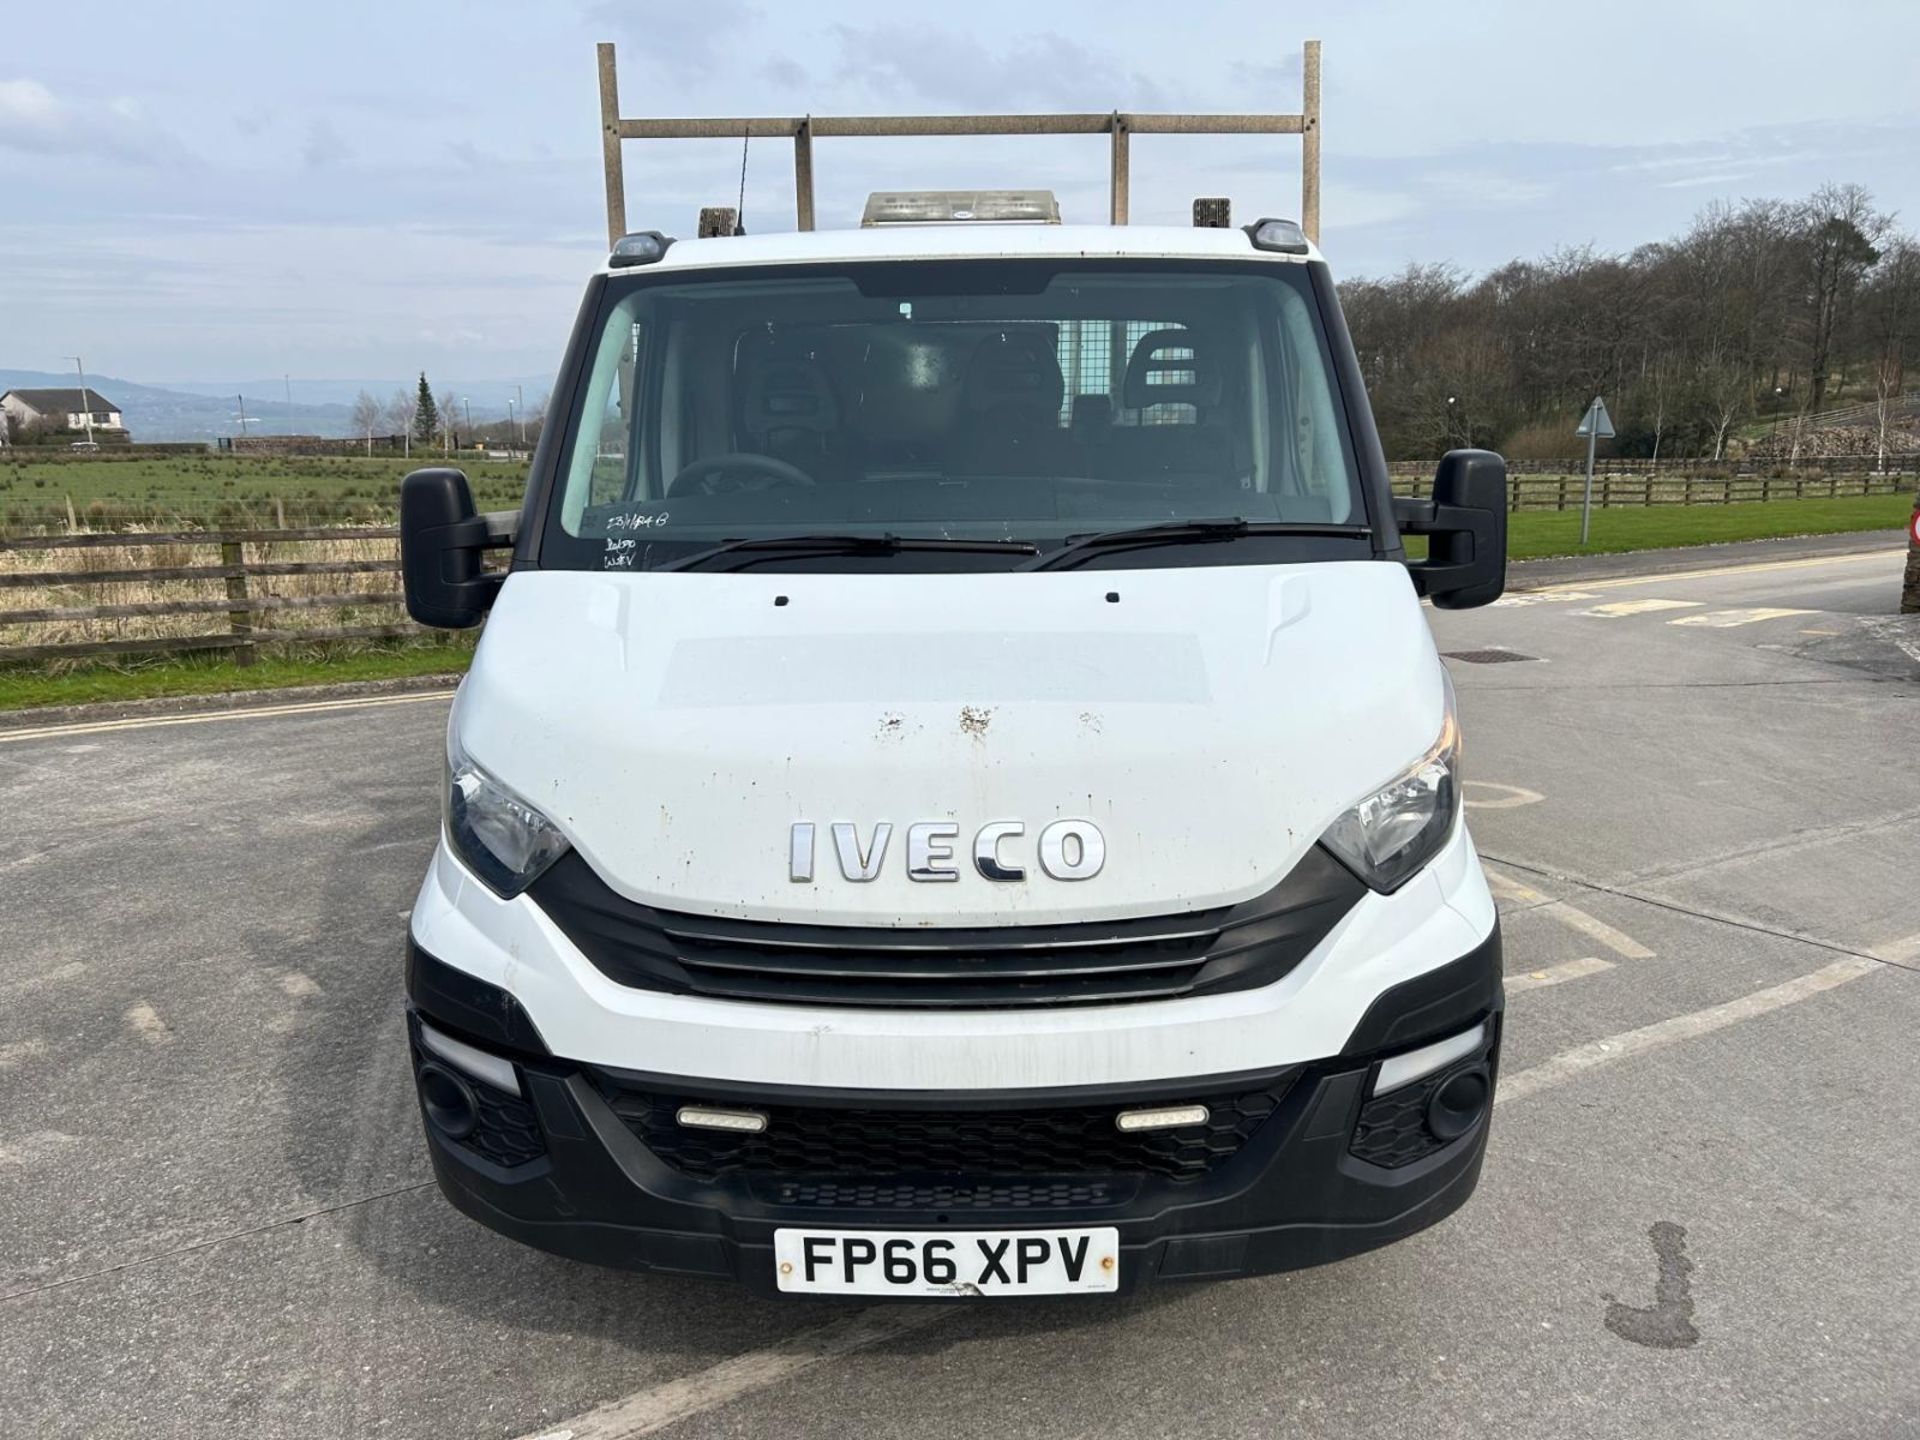 2016 IVECO DAILY - 112K MILES - HPI CLEAR - READY TO GO ! - Image 2 of 10